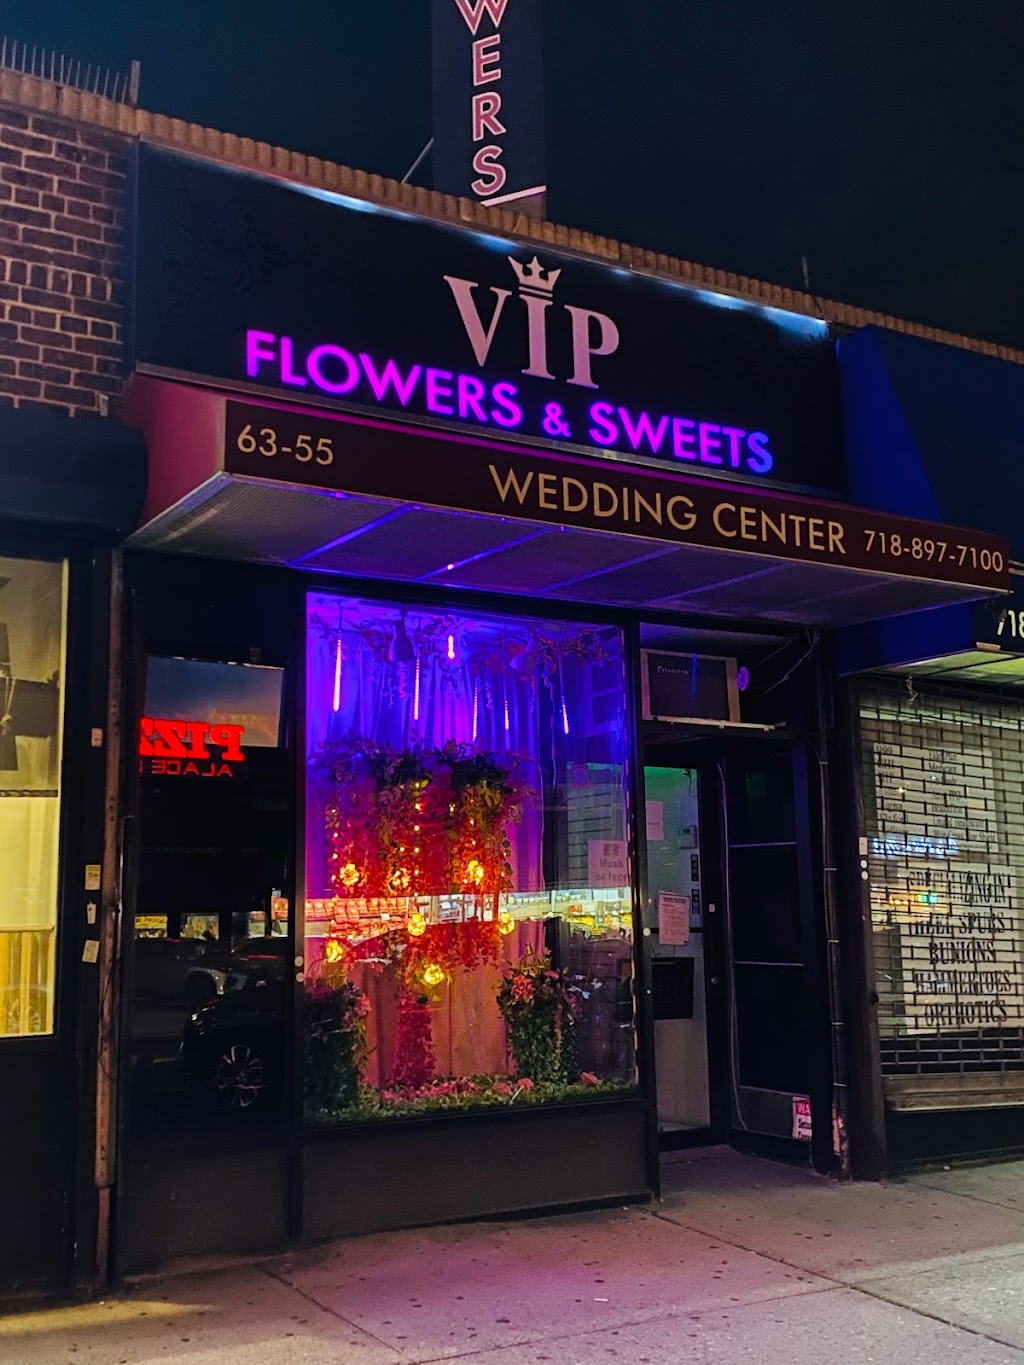 VIP Flowers & Wedding Center | 63-55 108th St, Forest Hills, NY 11375 | Phone: (718) 897-7100